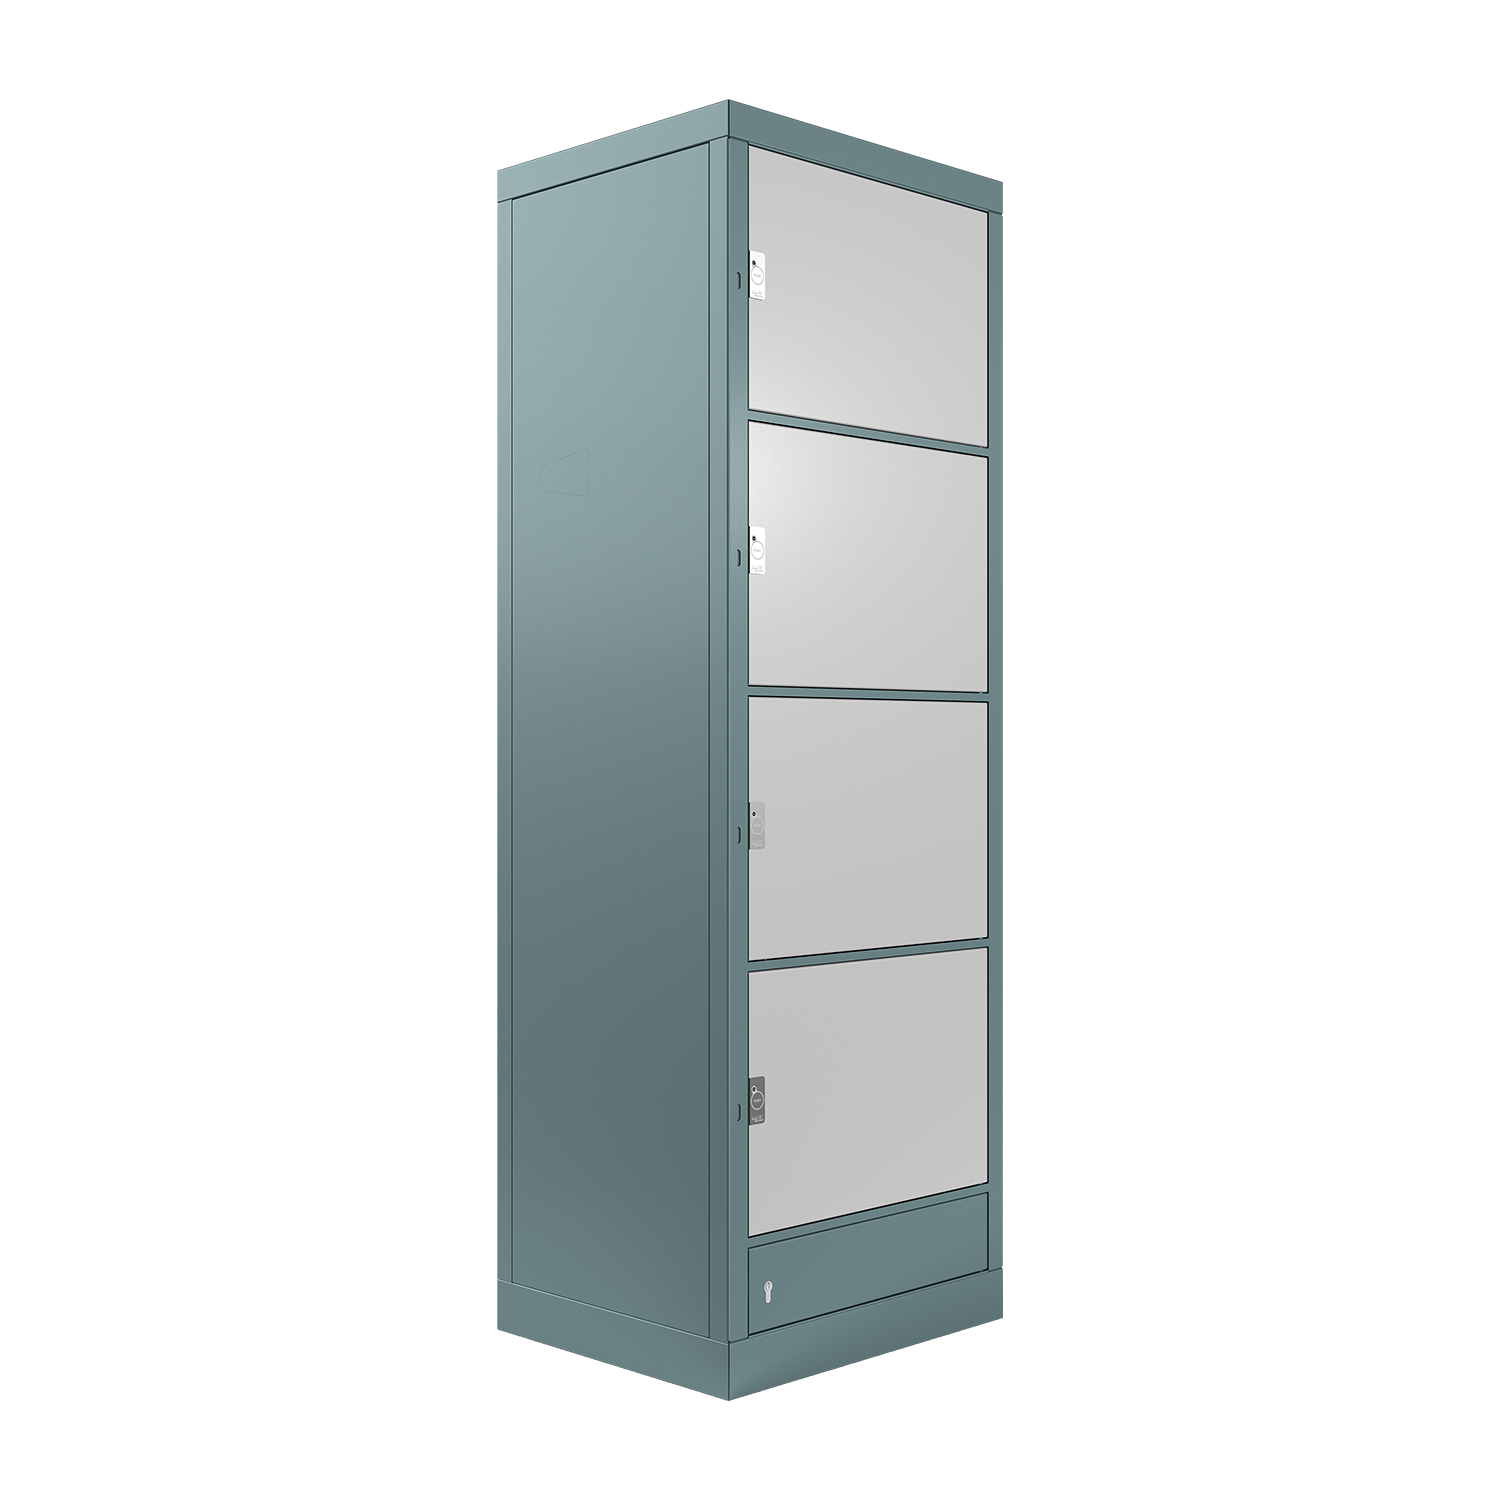 Locker system, L size, with 4 compartments for safekeeping